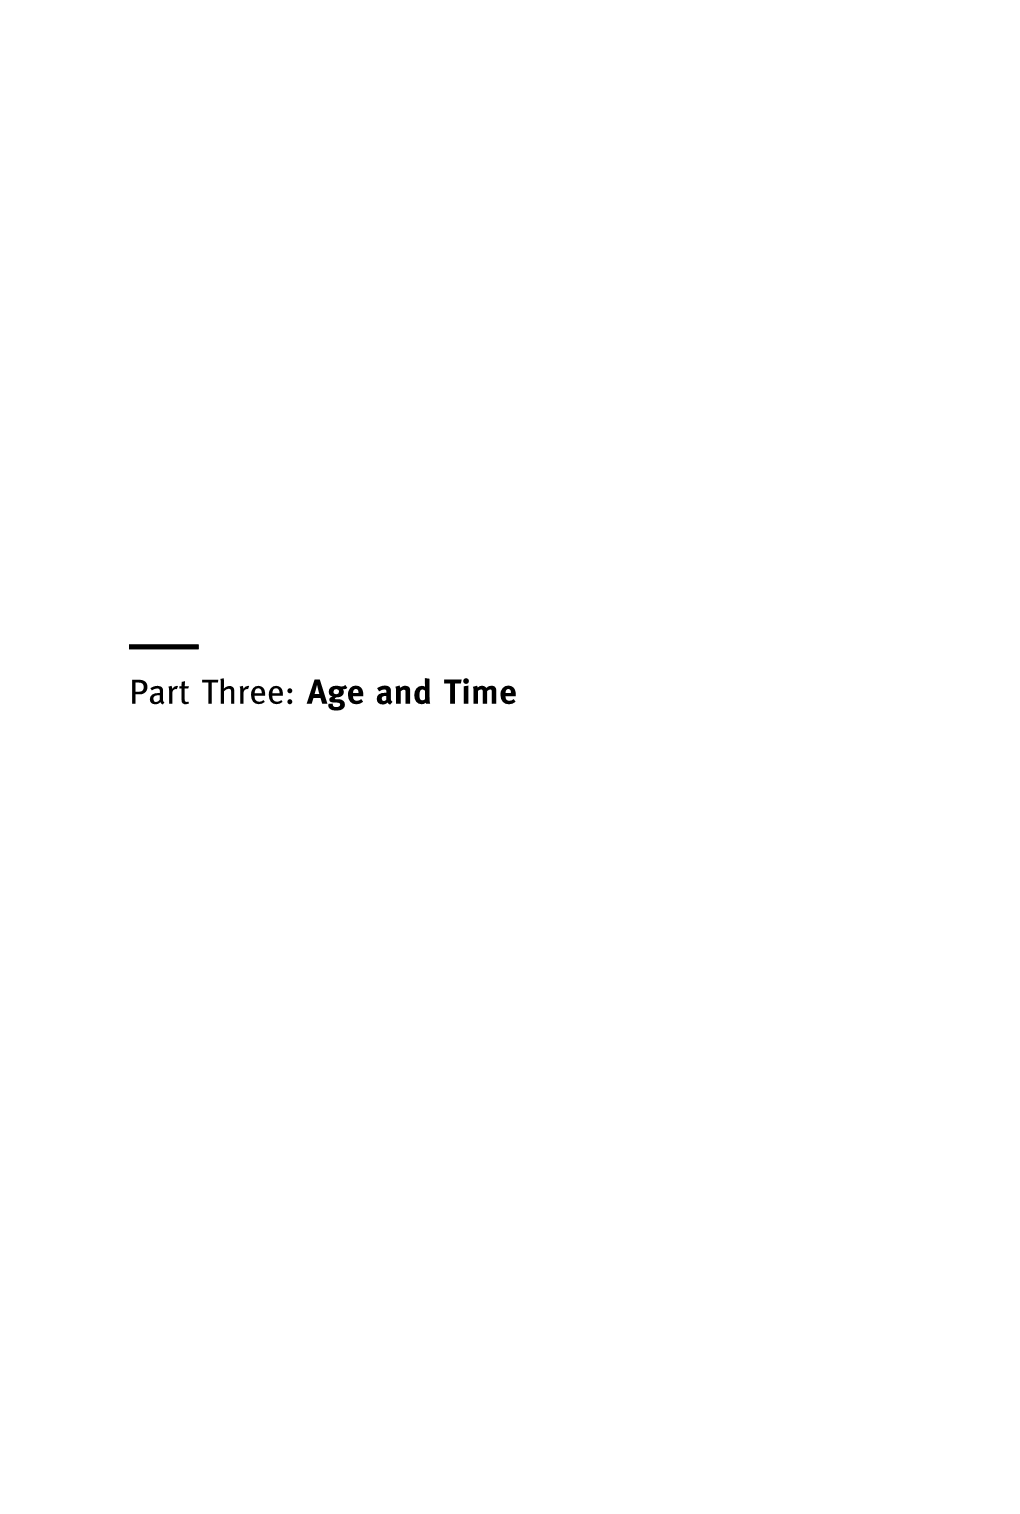 Part Three: Age and Time